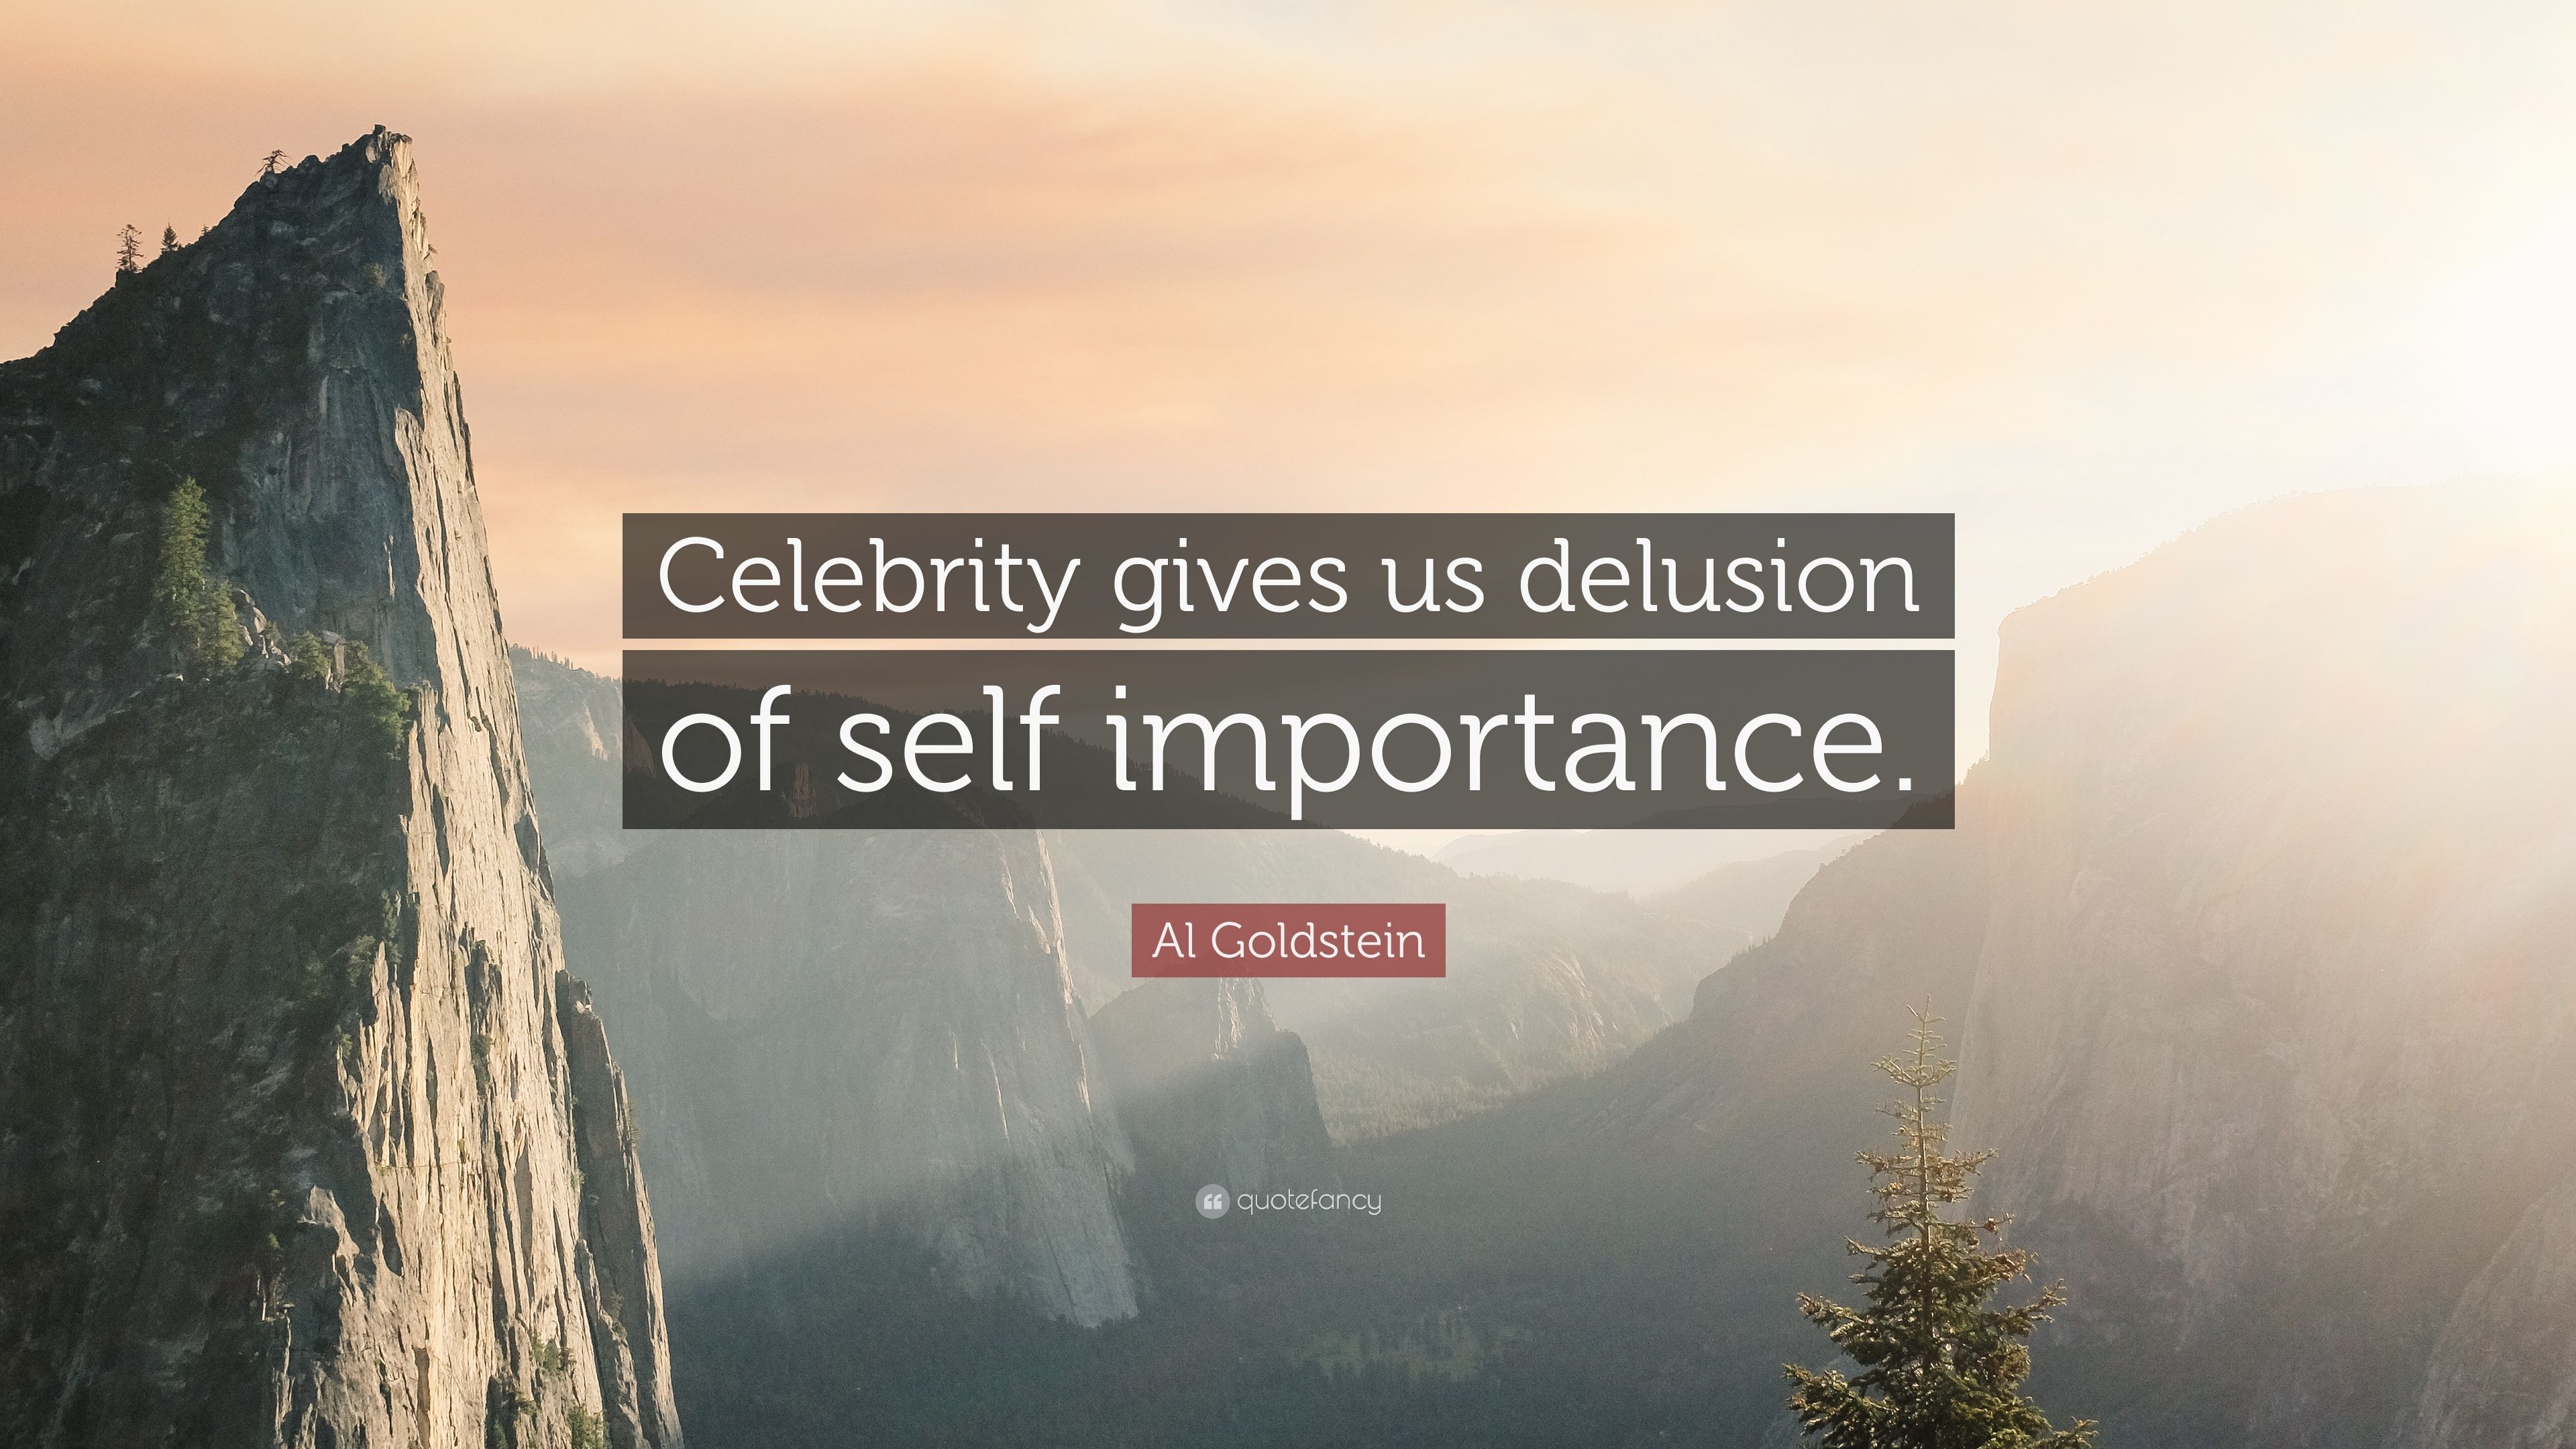 Al Goldstein Quote: “Celebrity gives us delusion of self